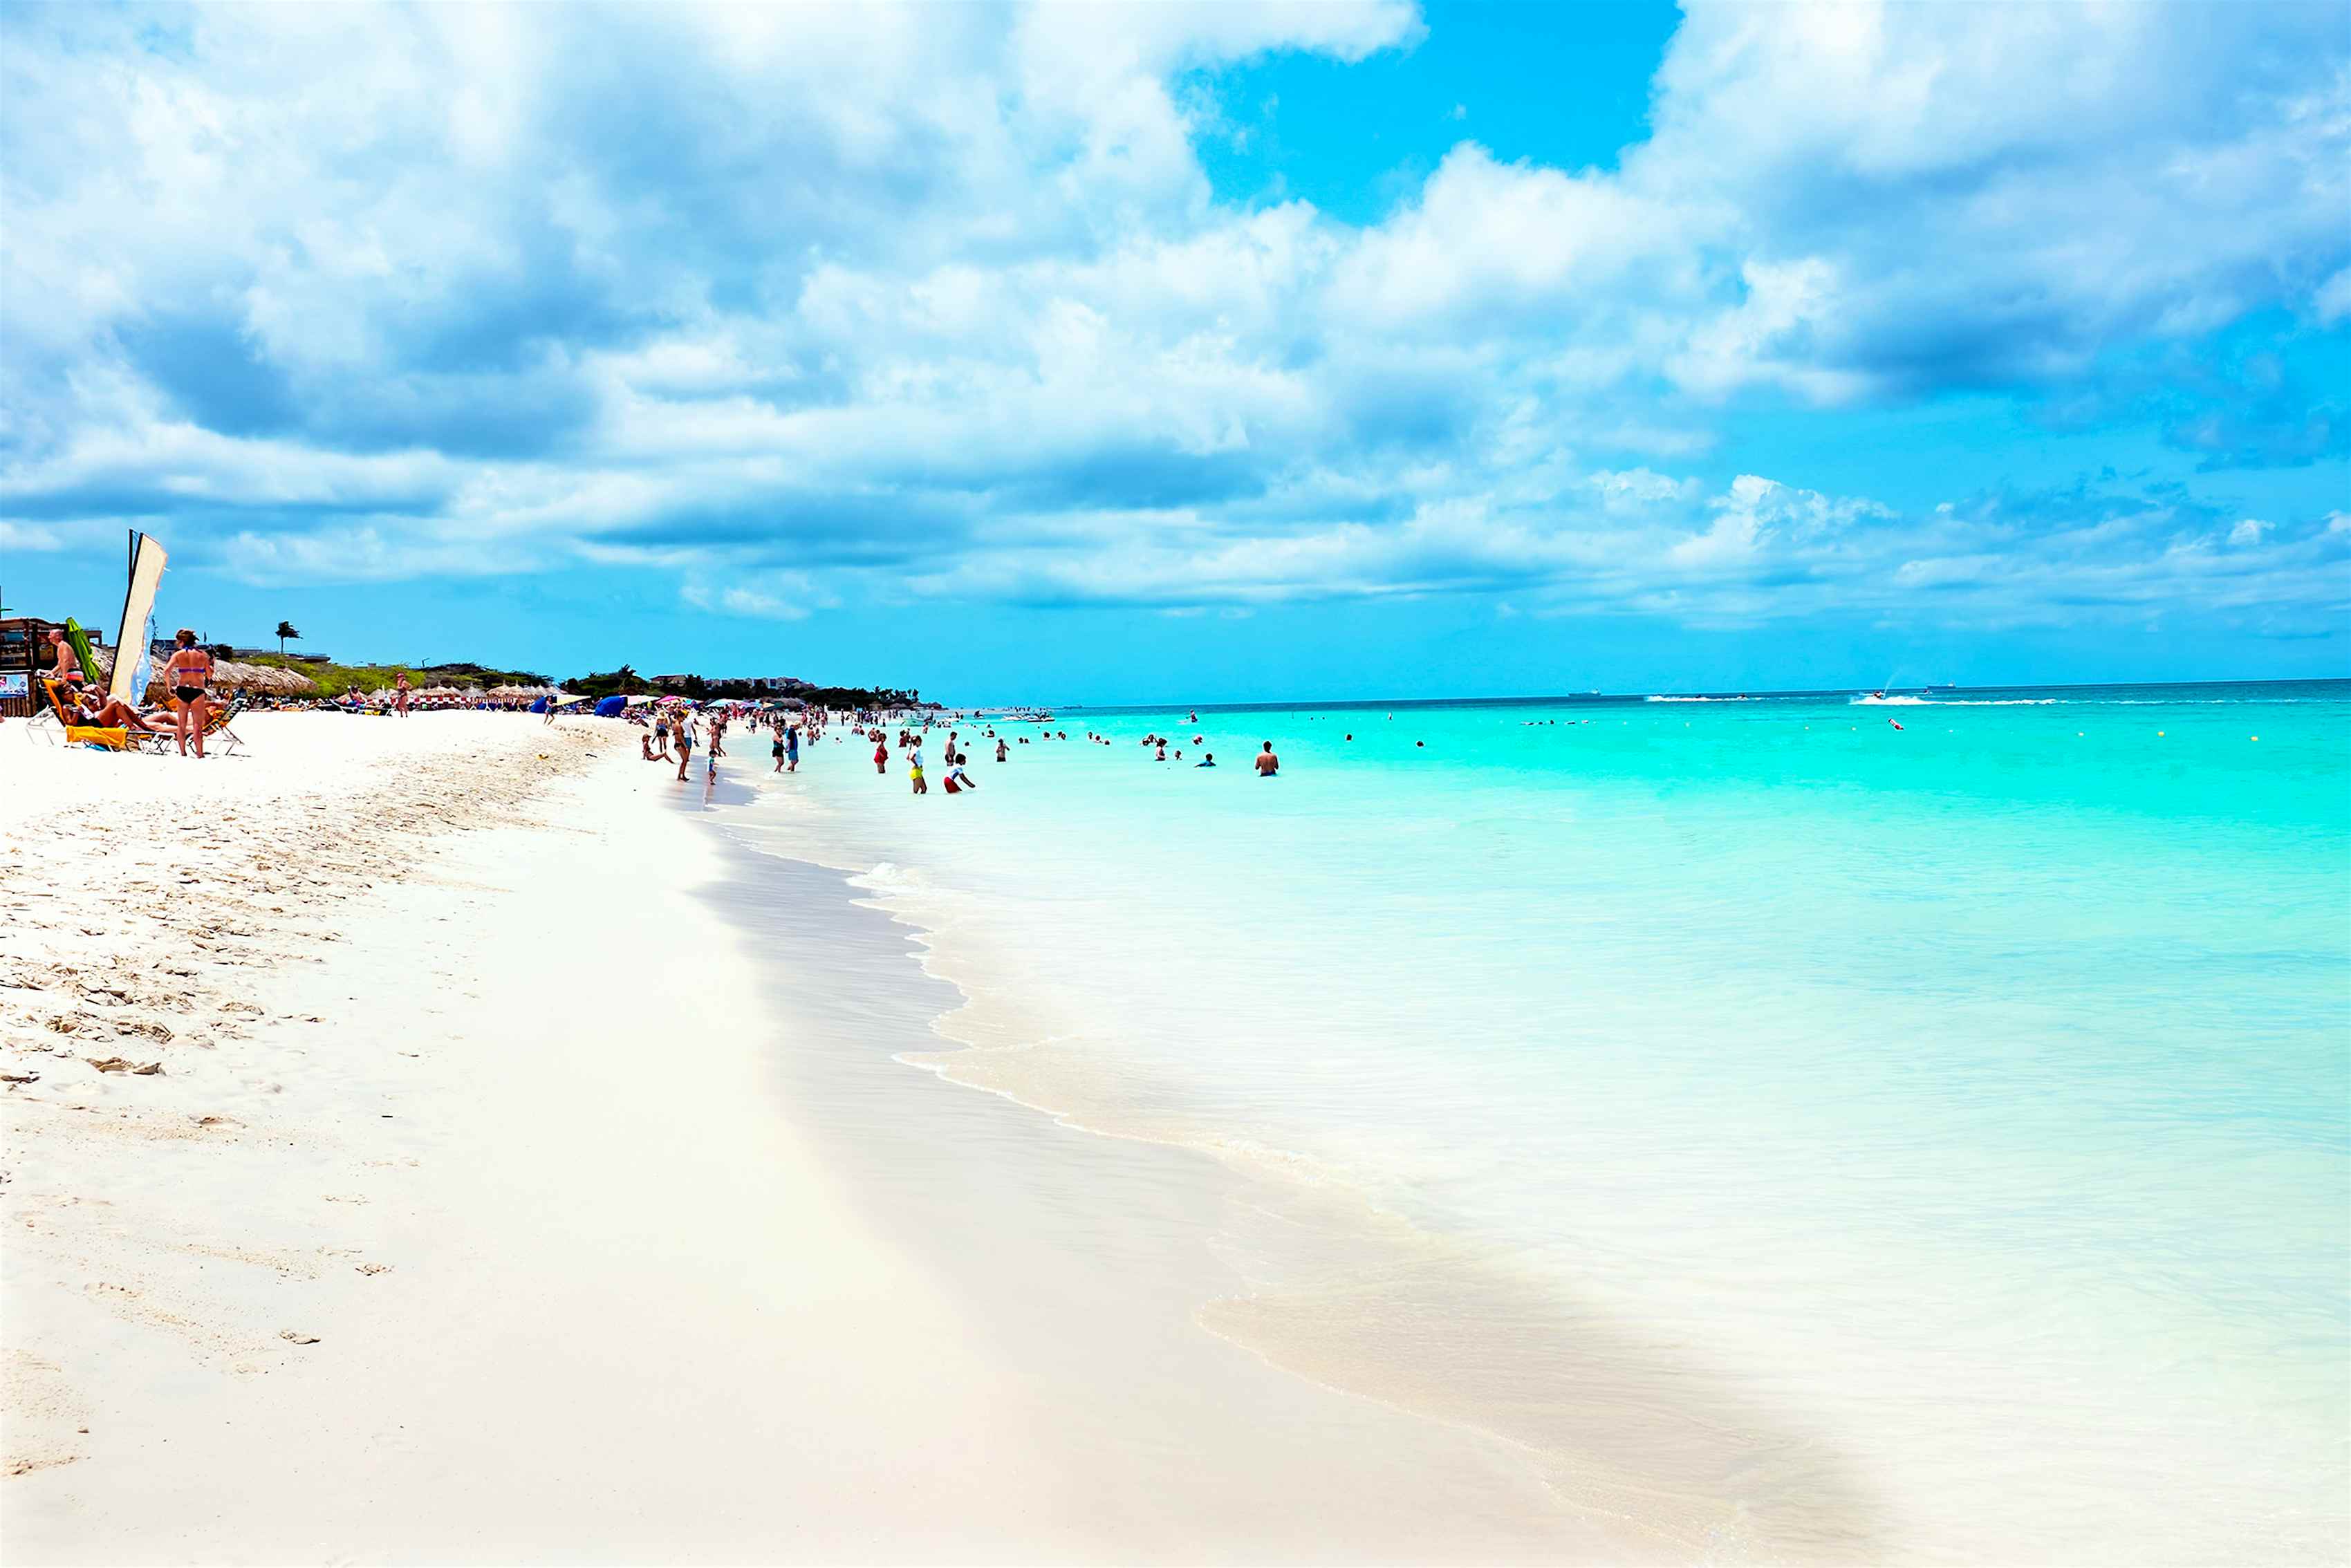 best and worst time to visit aruba